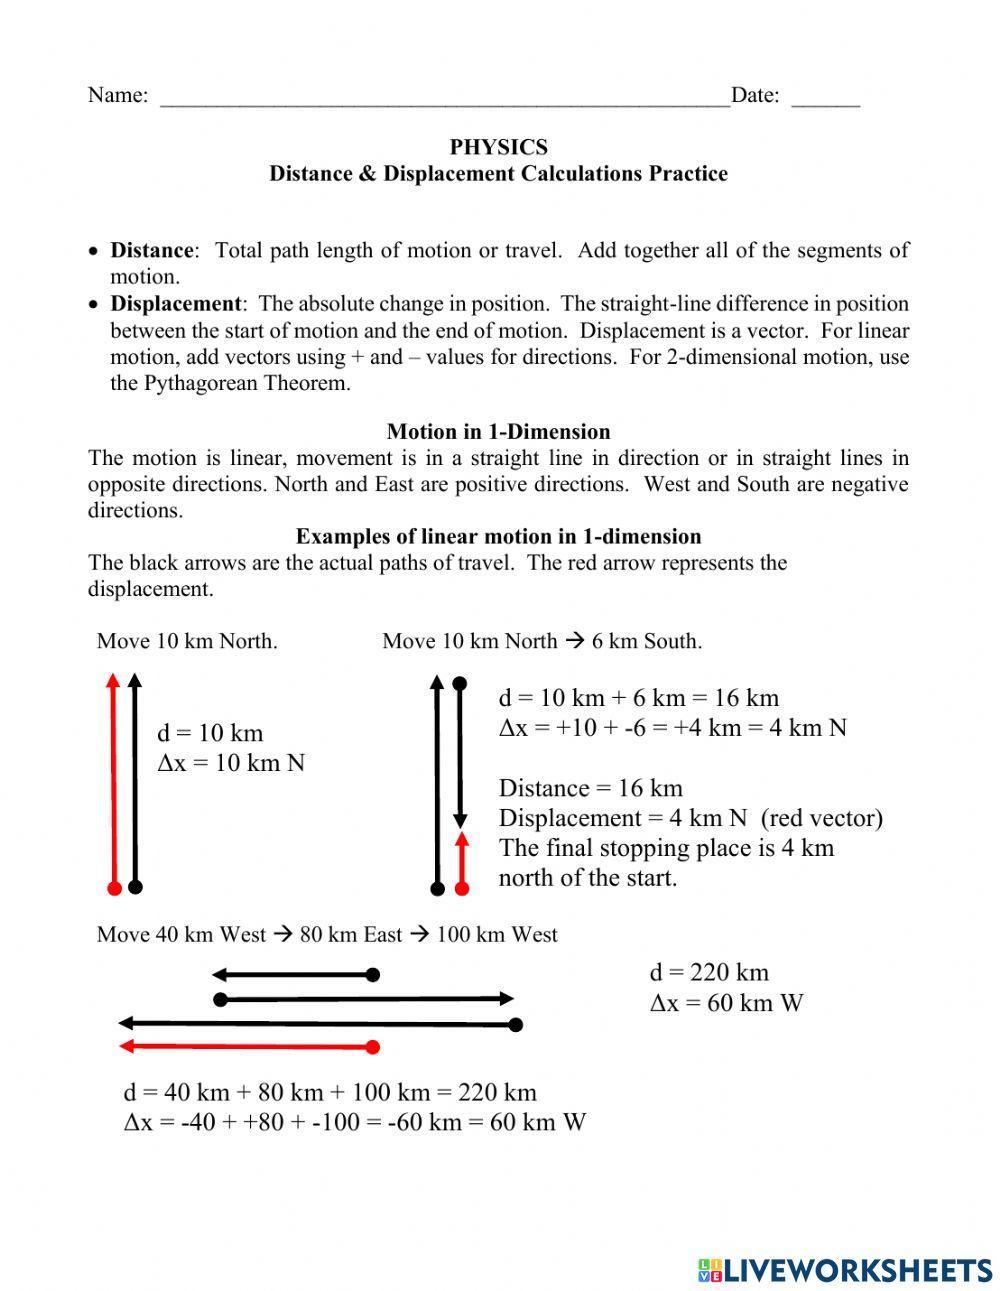 Distance & Displacement Calculations